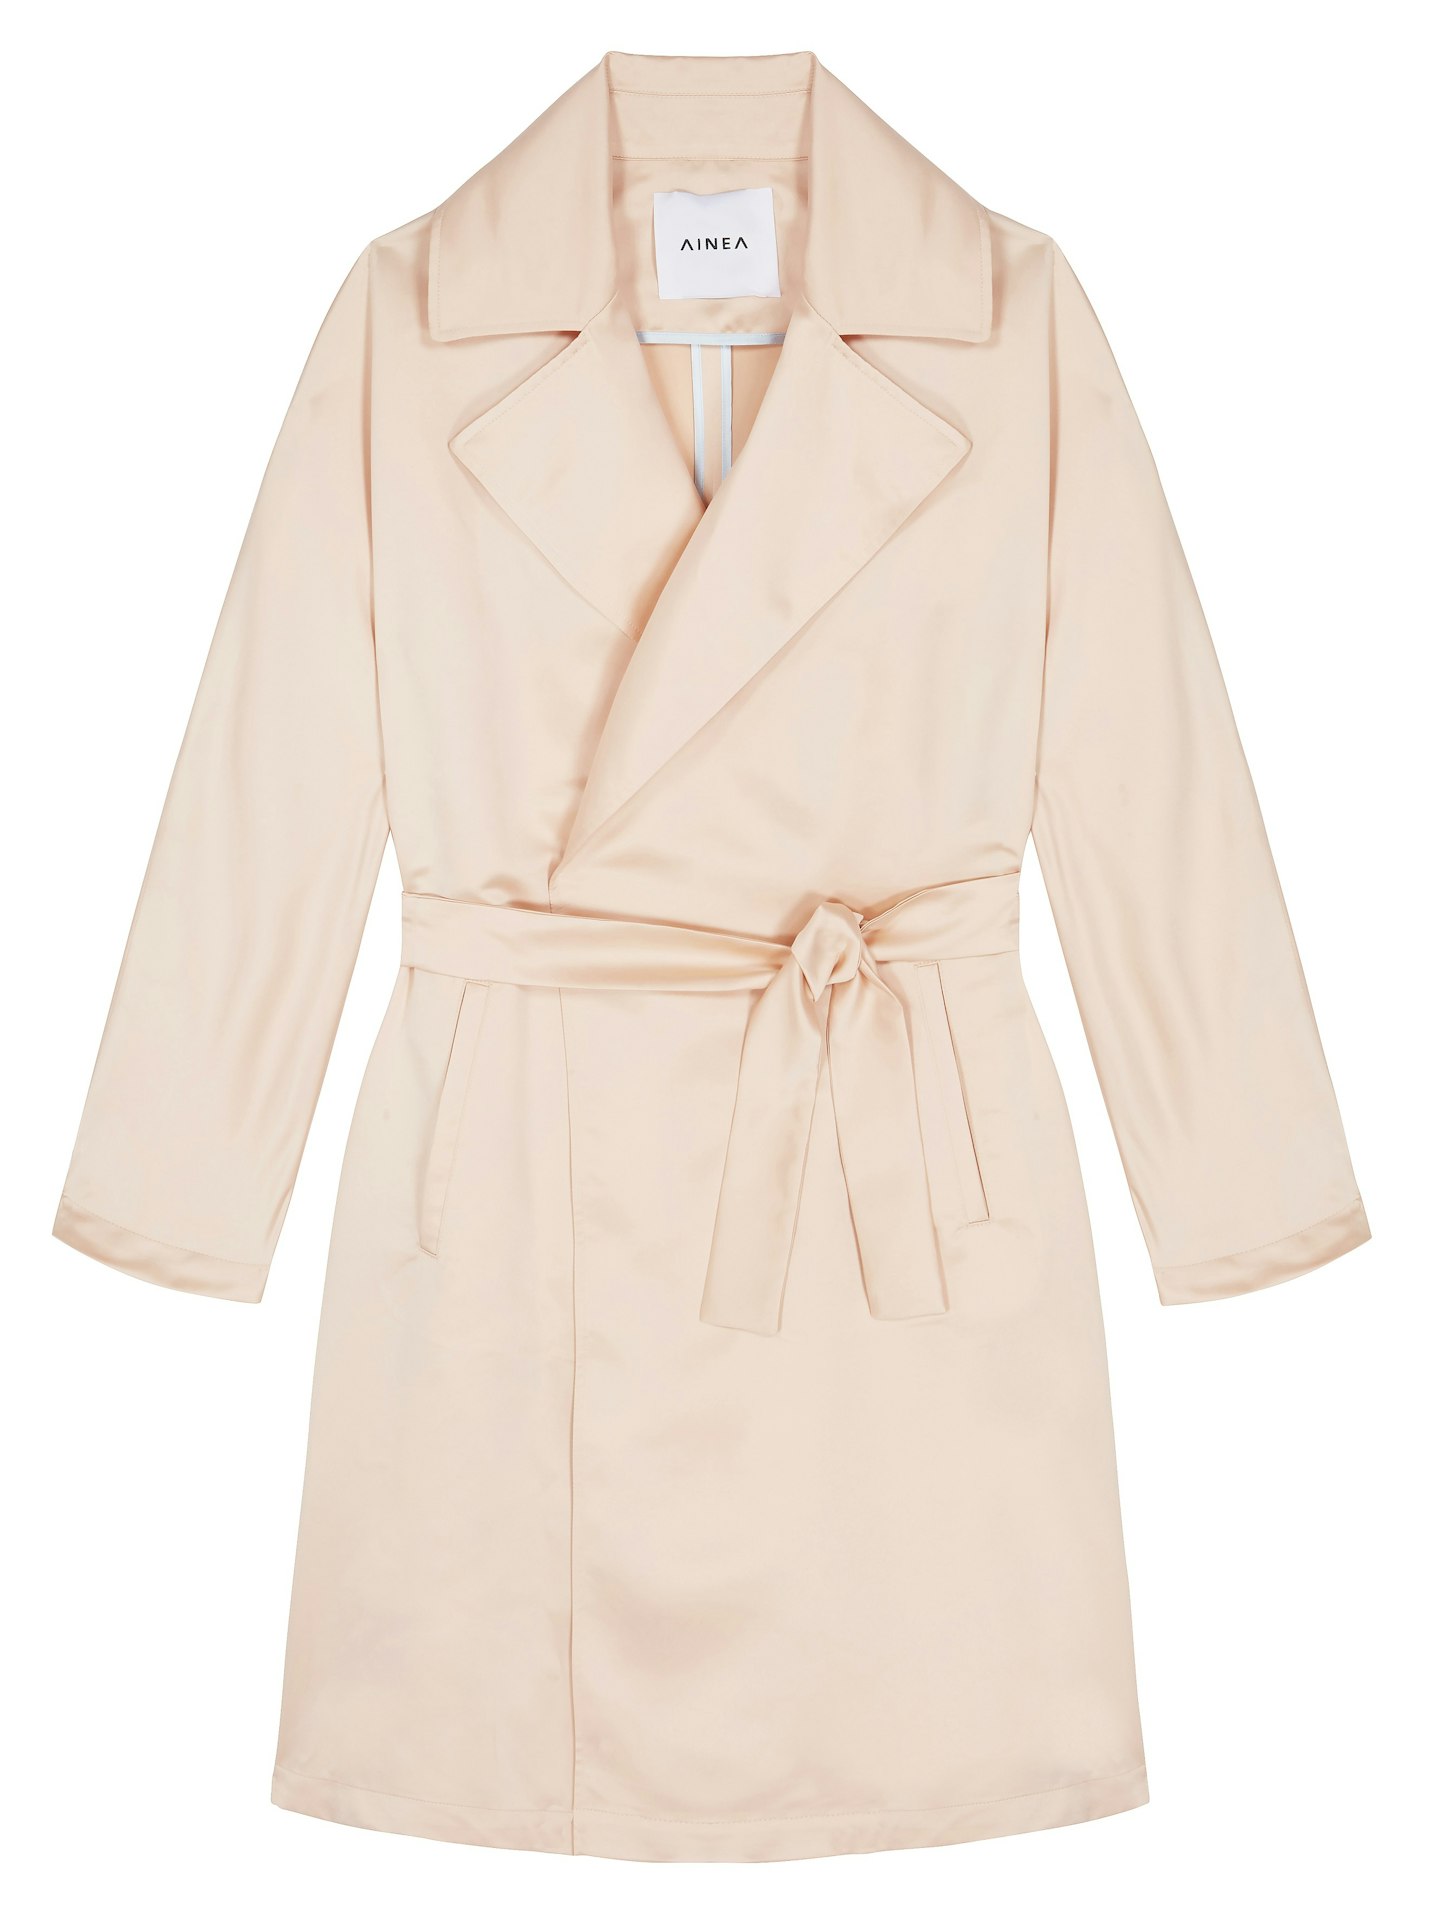 Ainea, Pink Trench Coat, £195